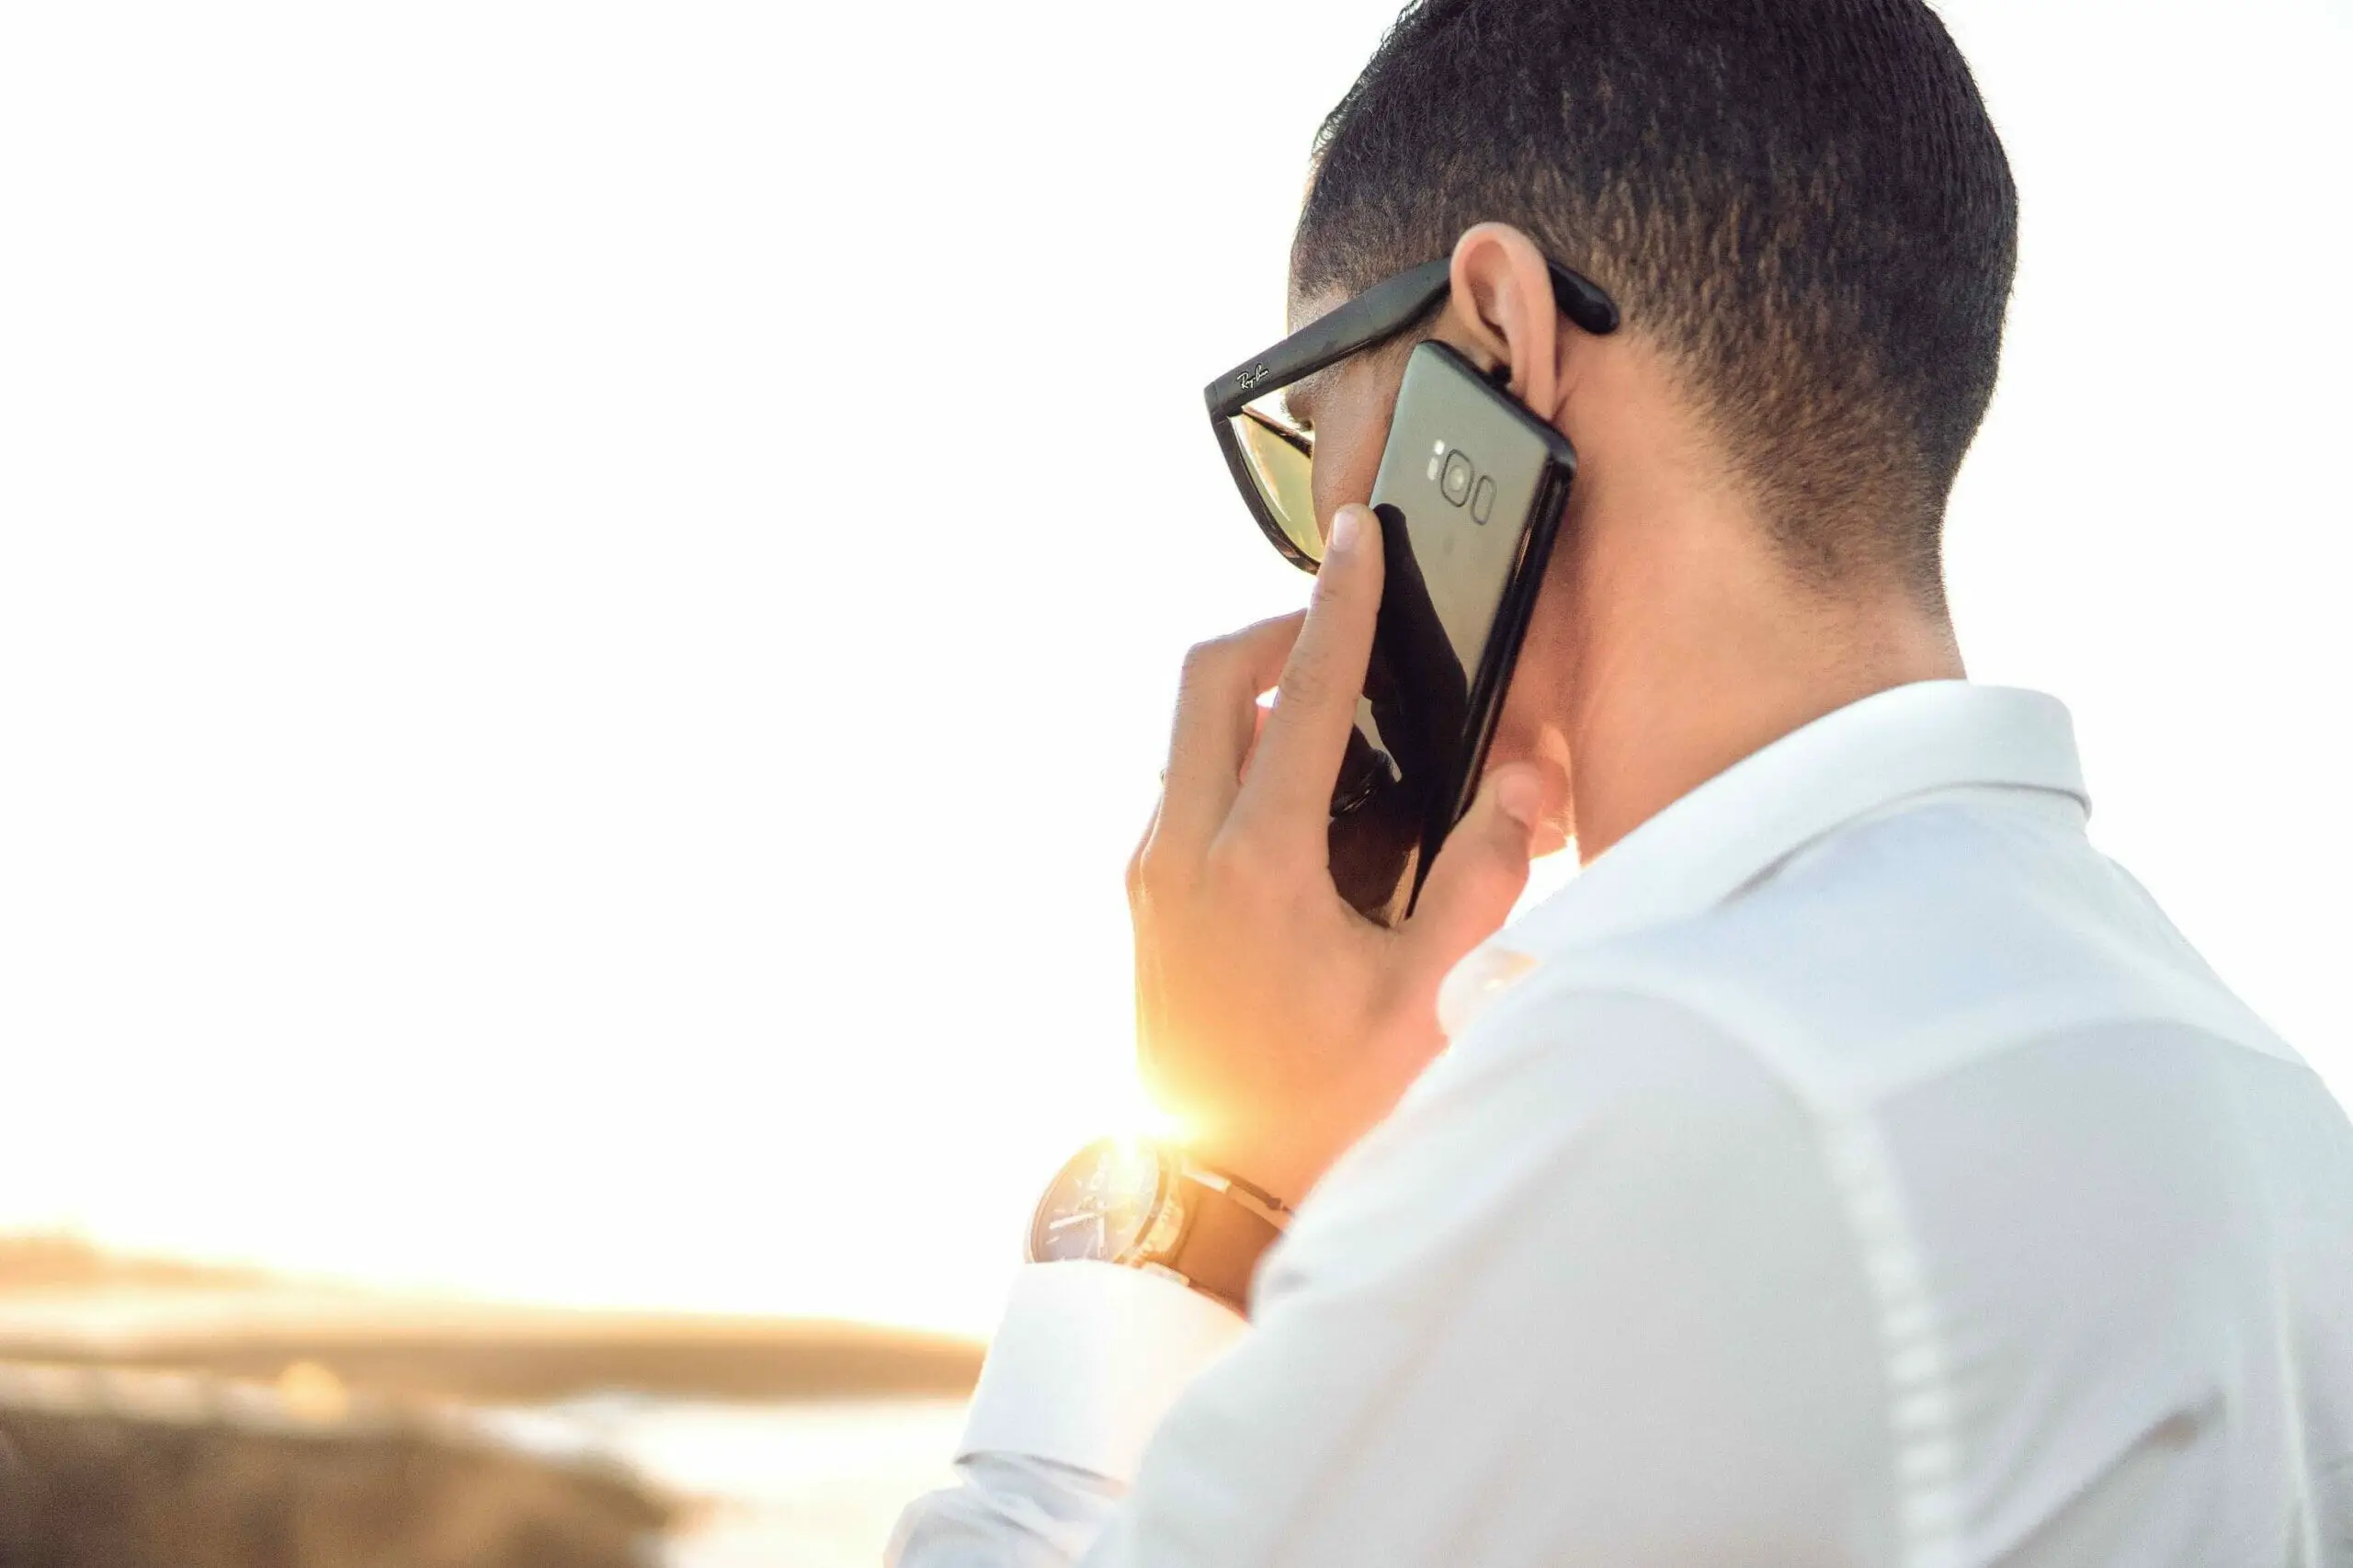 Man with sunglasses at the outdoors using his phone calling someone